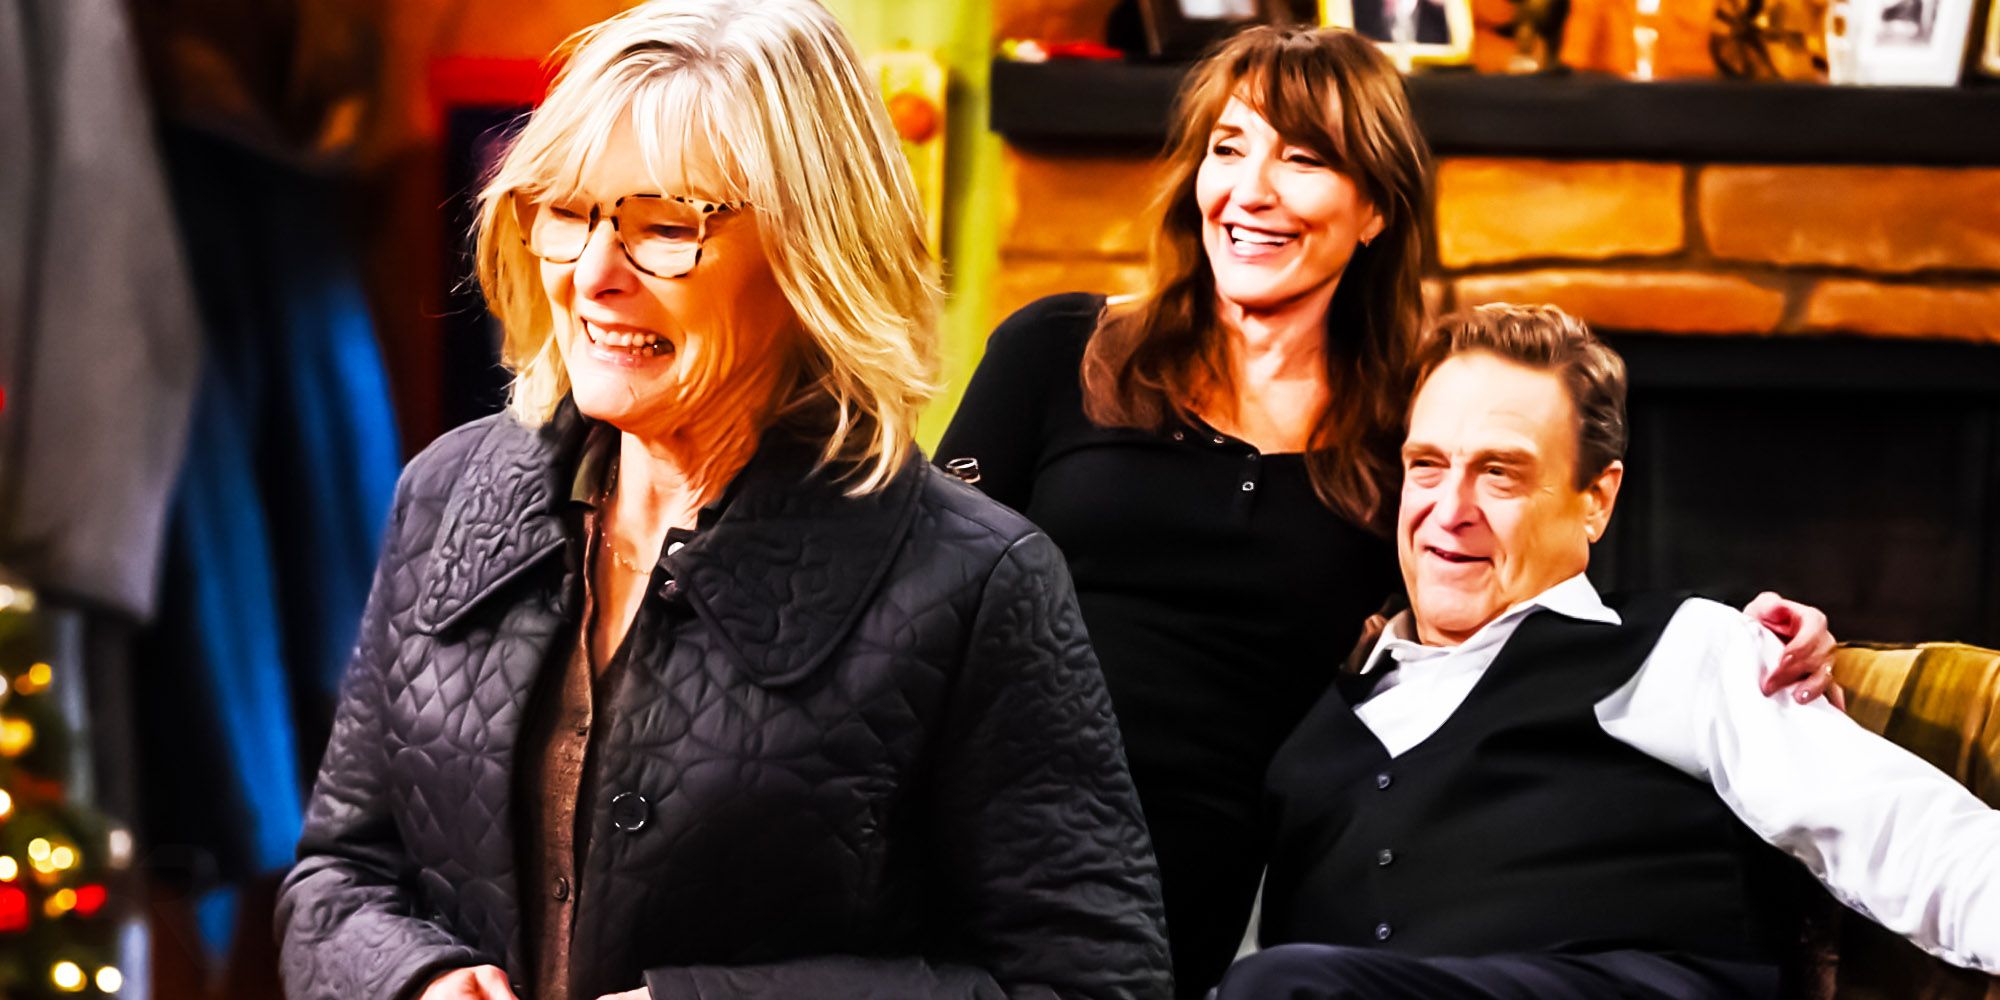 The conners louise Dan mother in law jane curtin